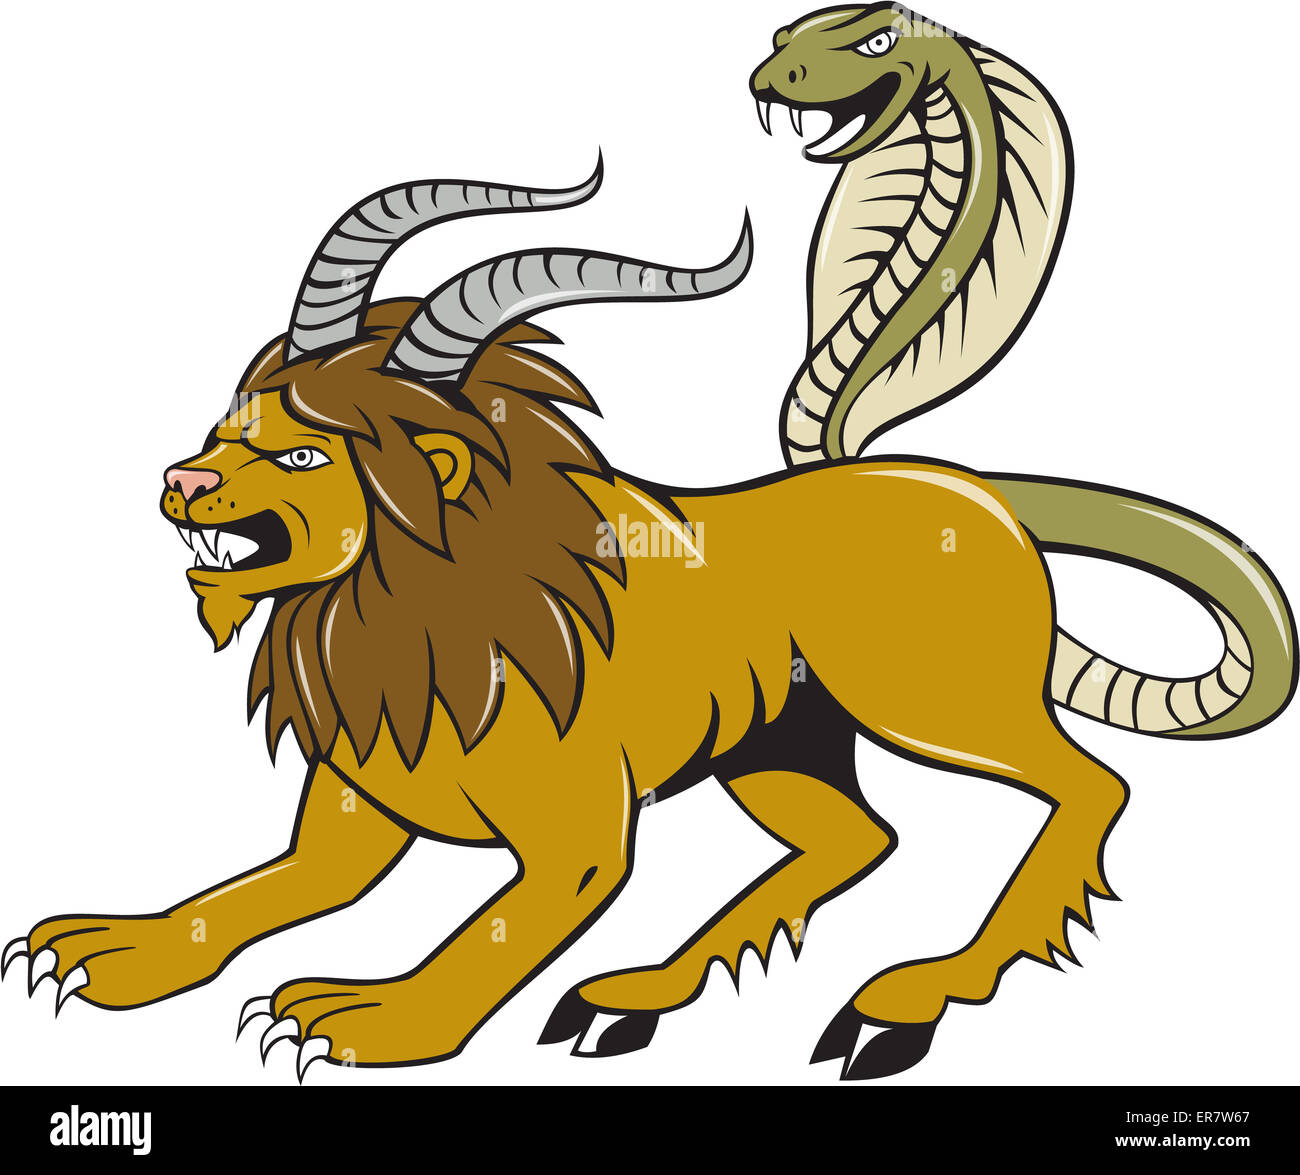 Illustration of a Chimera, mythical creature of Greek mythology depicted as a lion, with the head of a goat arising from its back, and a tail that ended in a snake's head viewed from side done in cartoon style on isolated background. Stock Photo